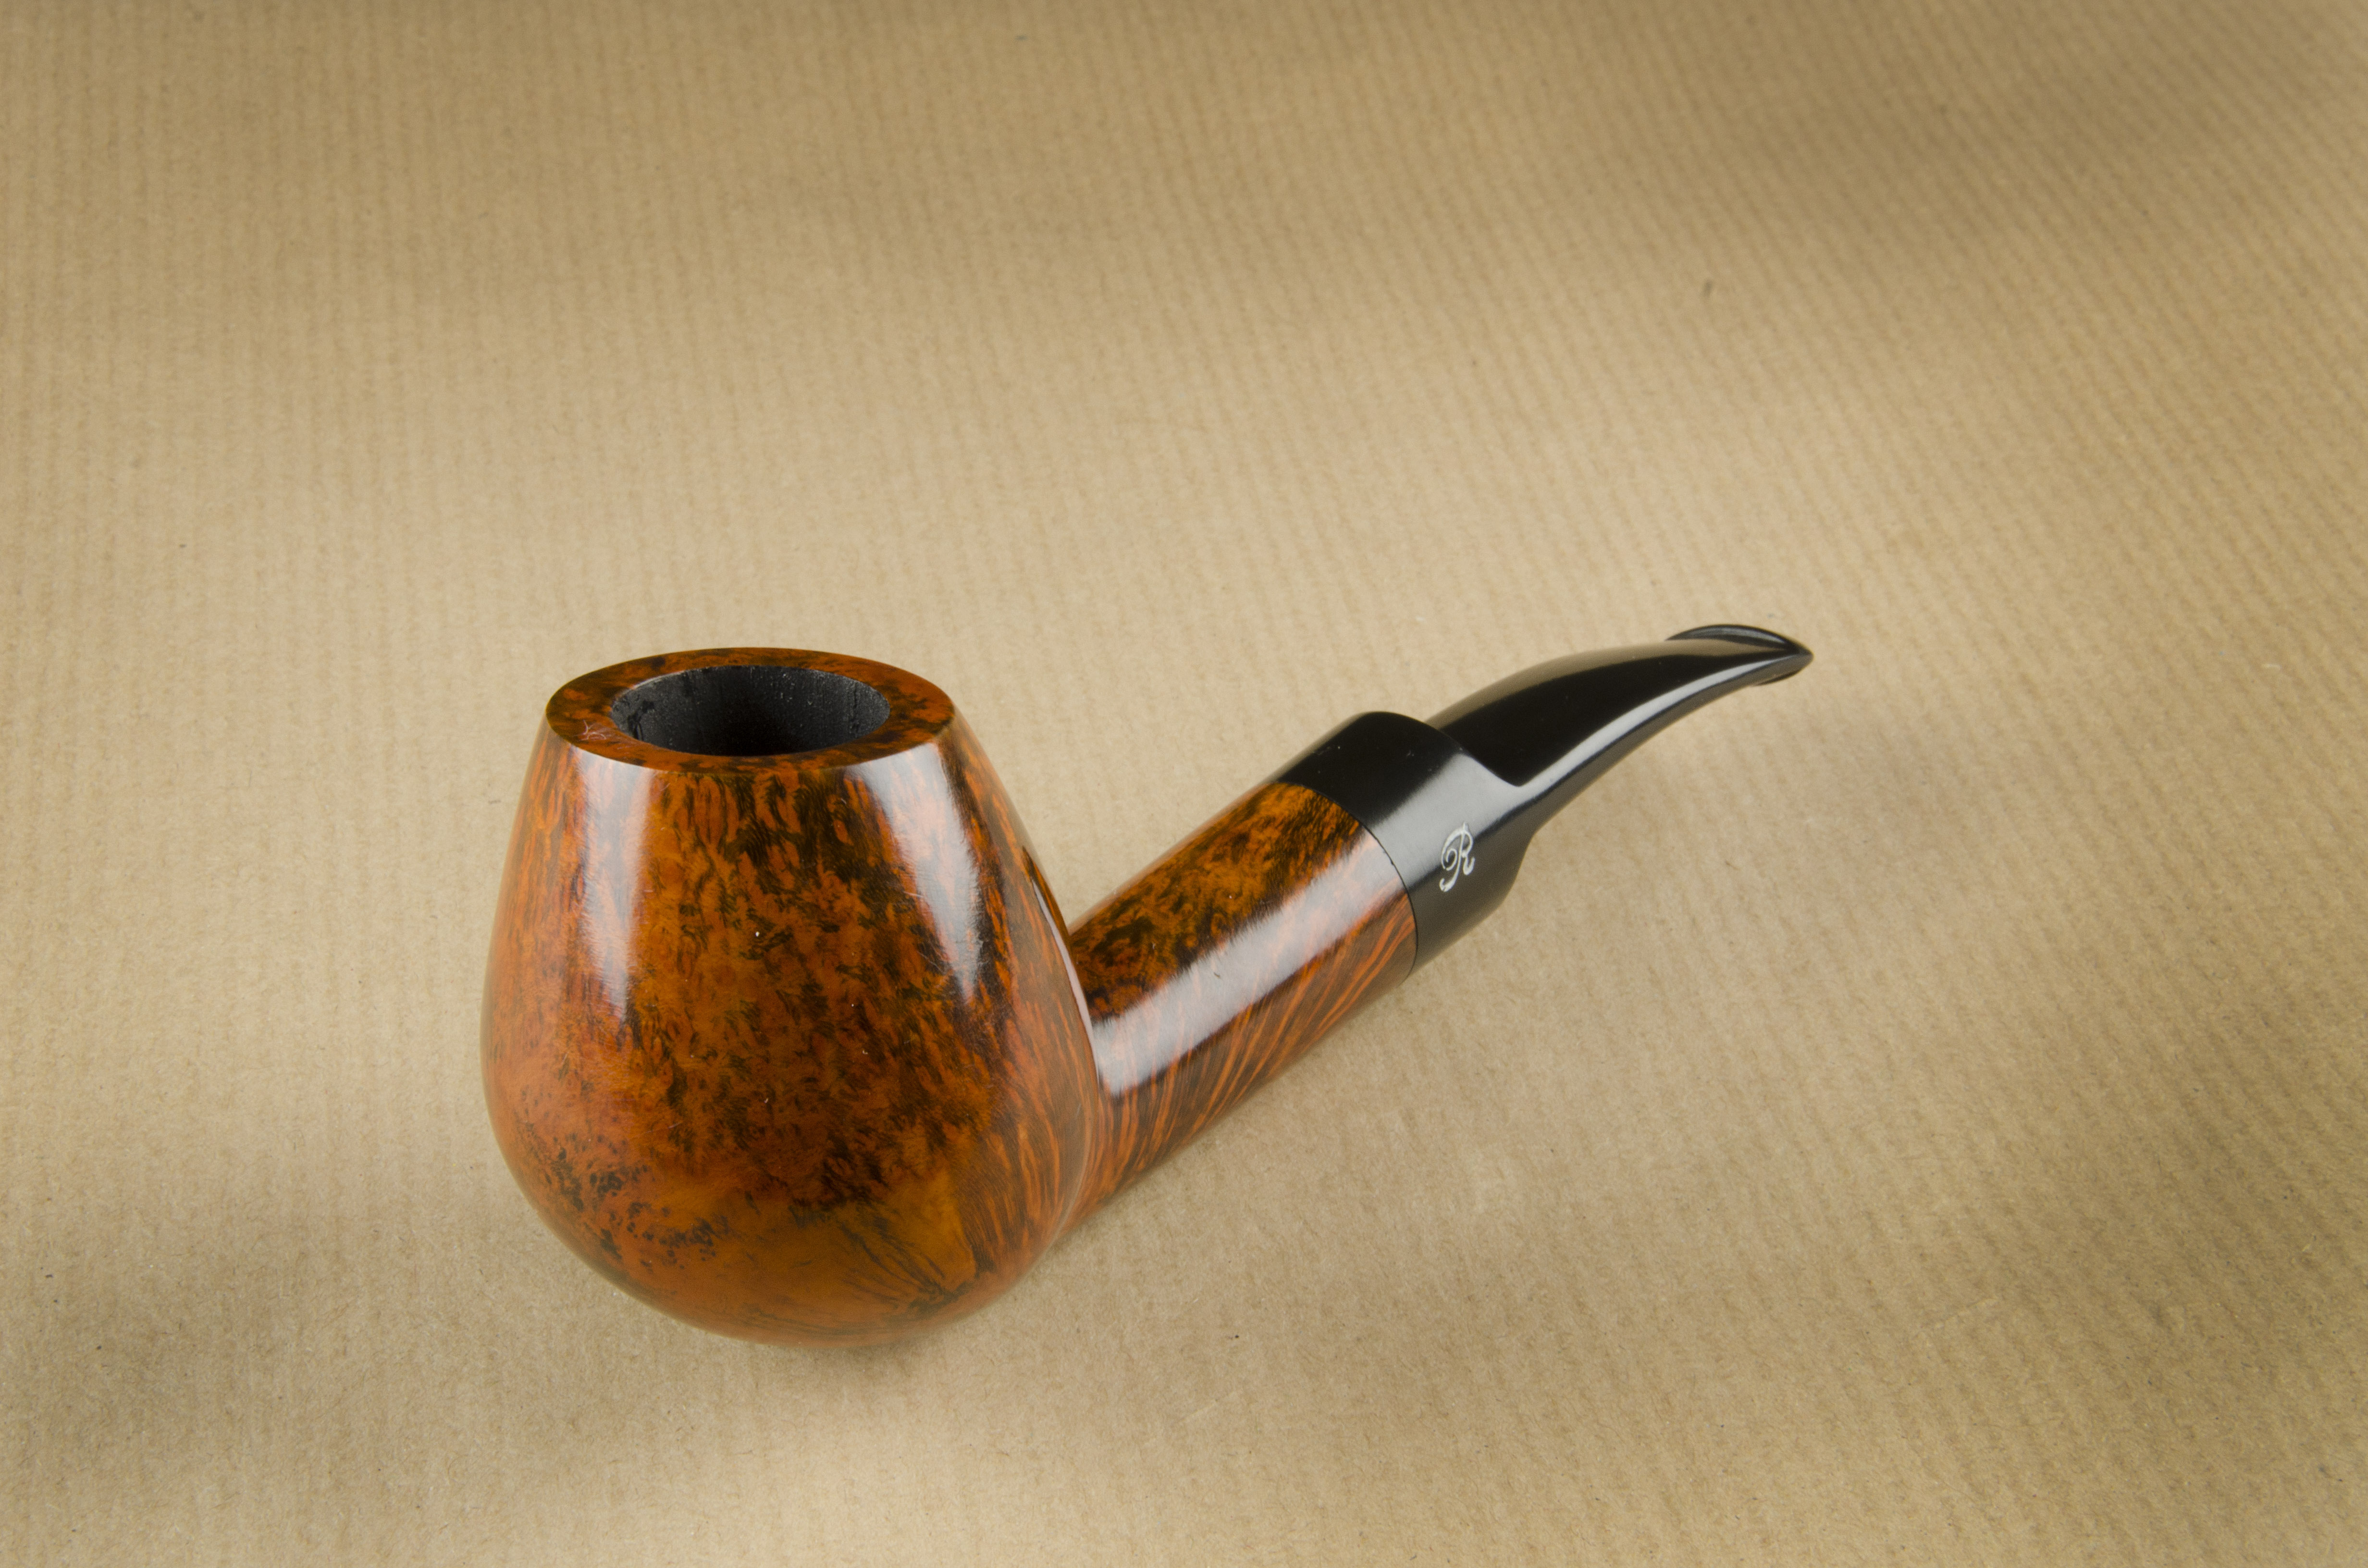 A Refbjerg briar estate pipe, the apple shaped bowl and stem, flame grain, and hand cut logo